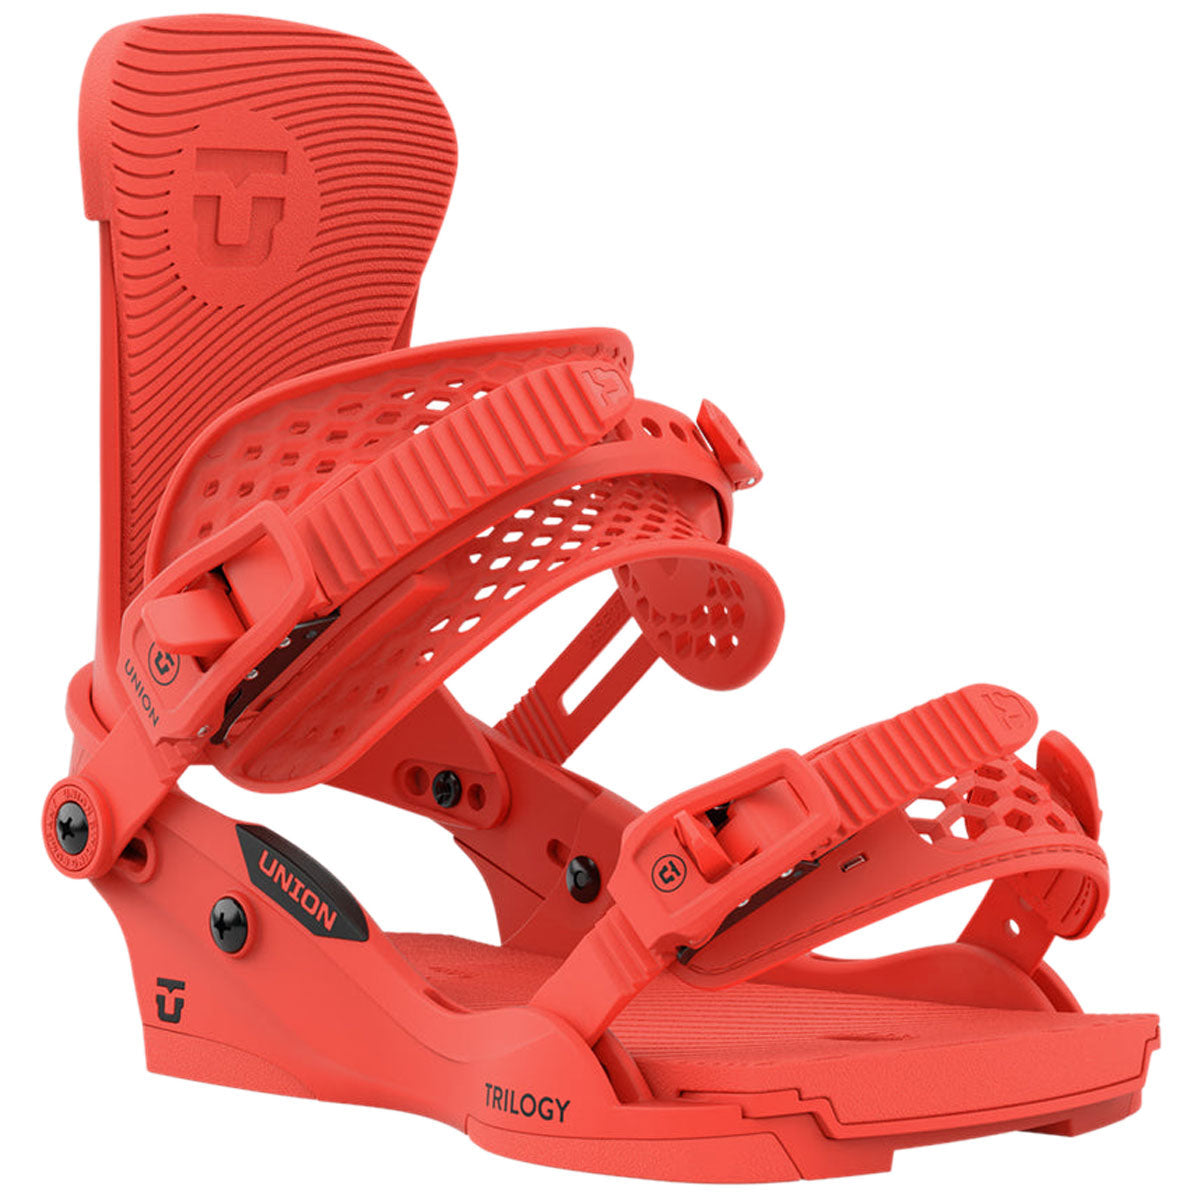 Union Womens Trilogy 2023 Snowboard Bindings - Coral image 2